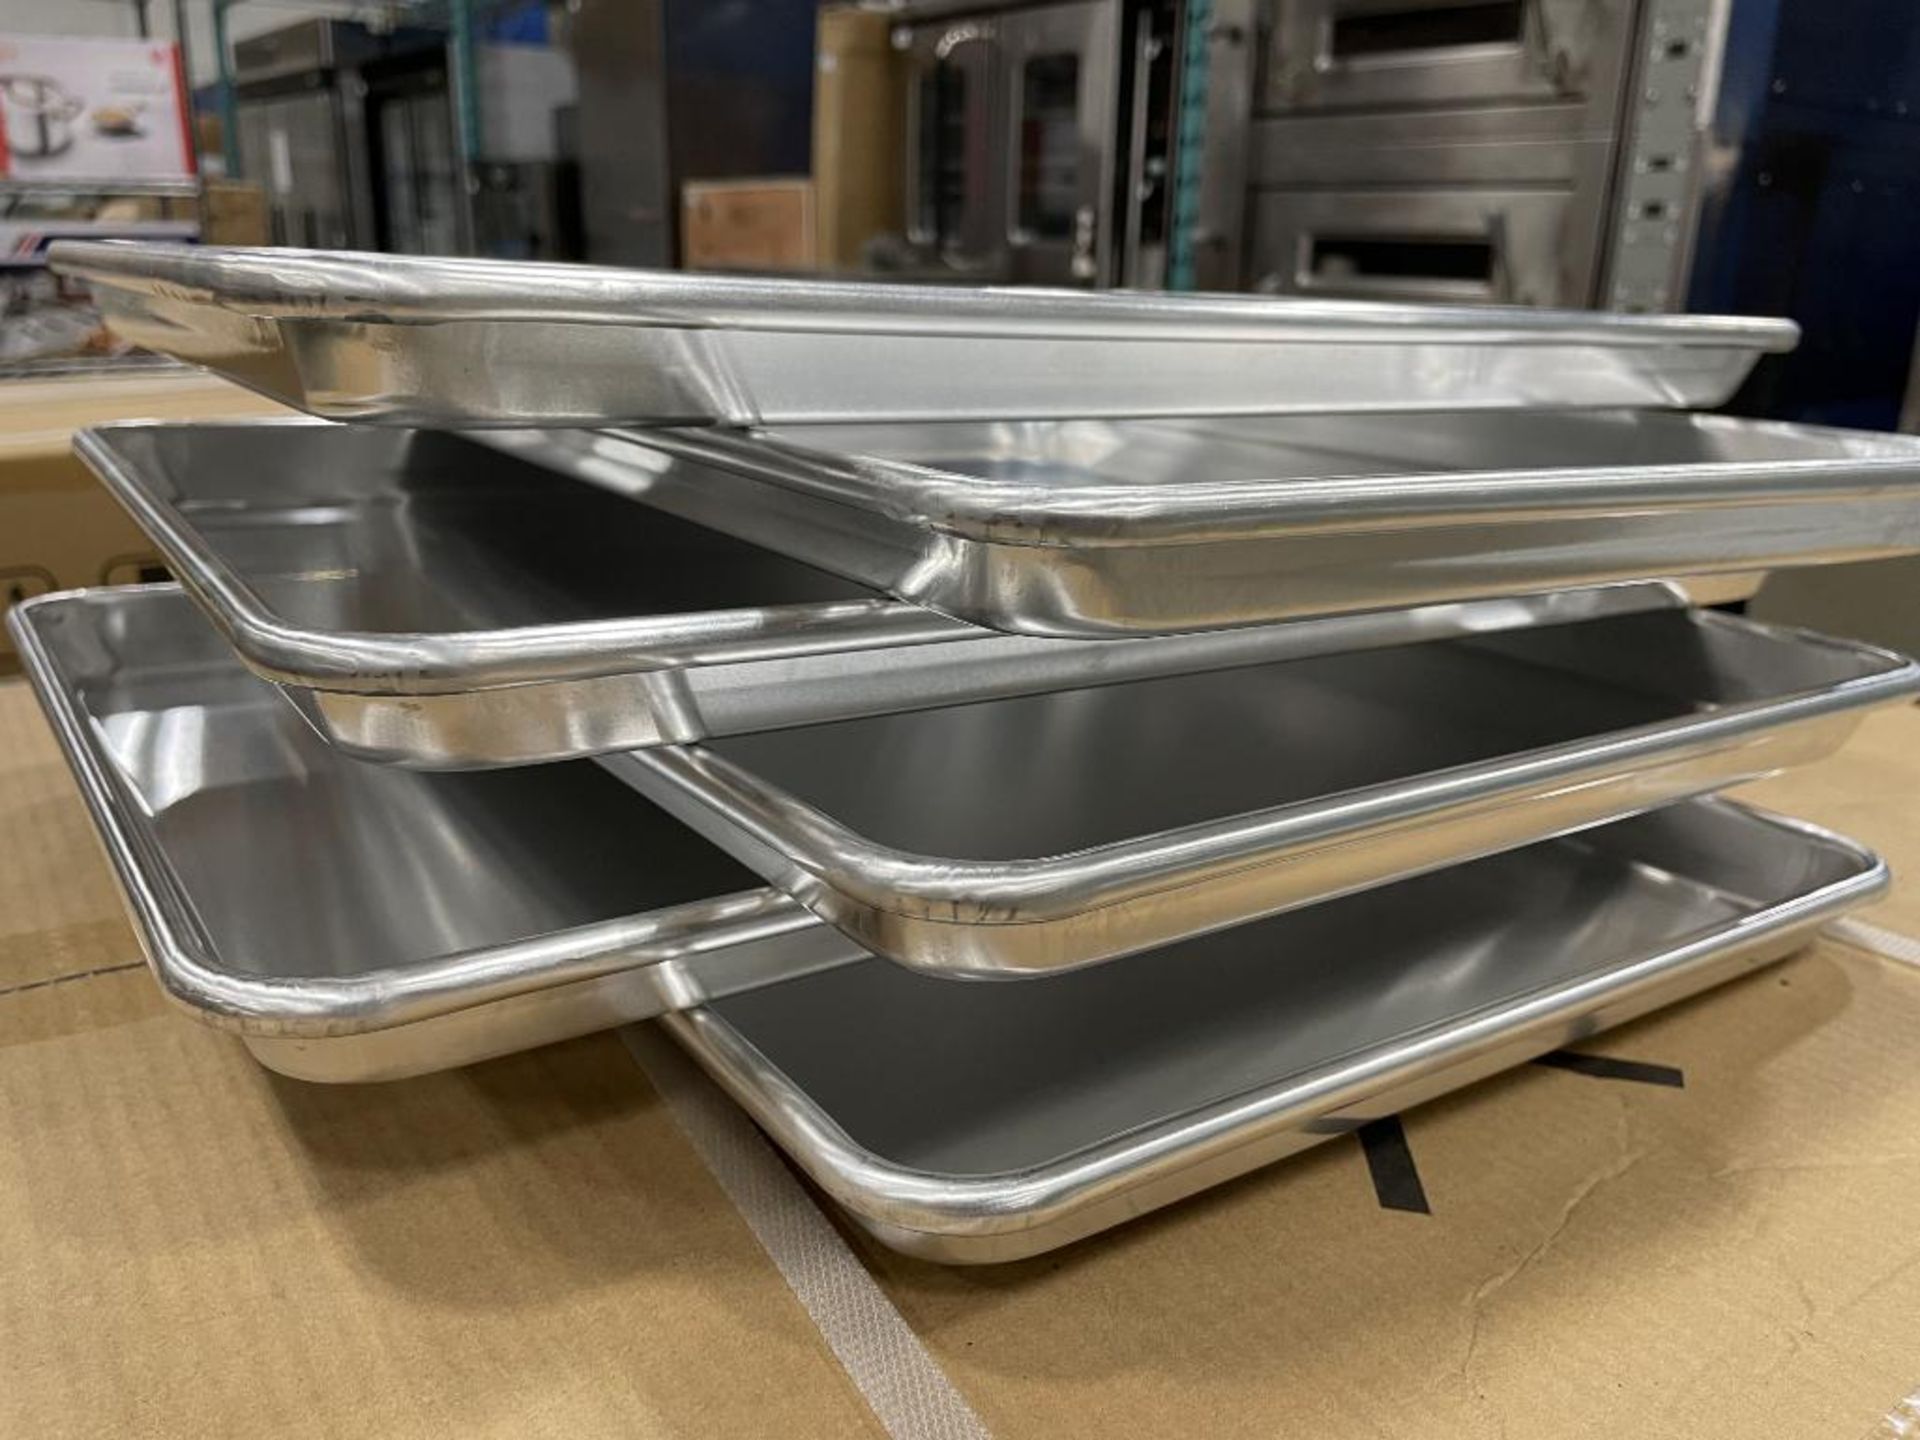 LOT OF (6) HALF SIZE BUN PANS, UPDATE ABNP-50 - NEW - Image 5 of 6